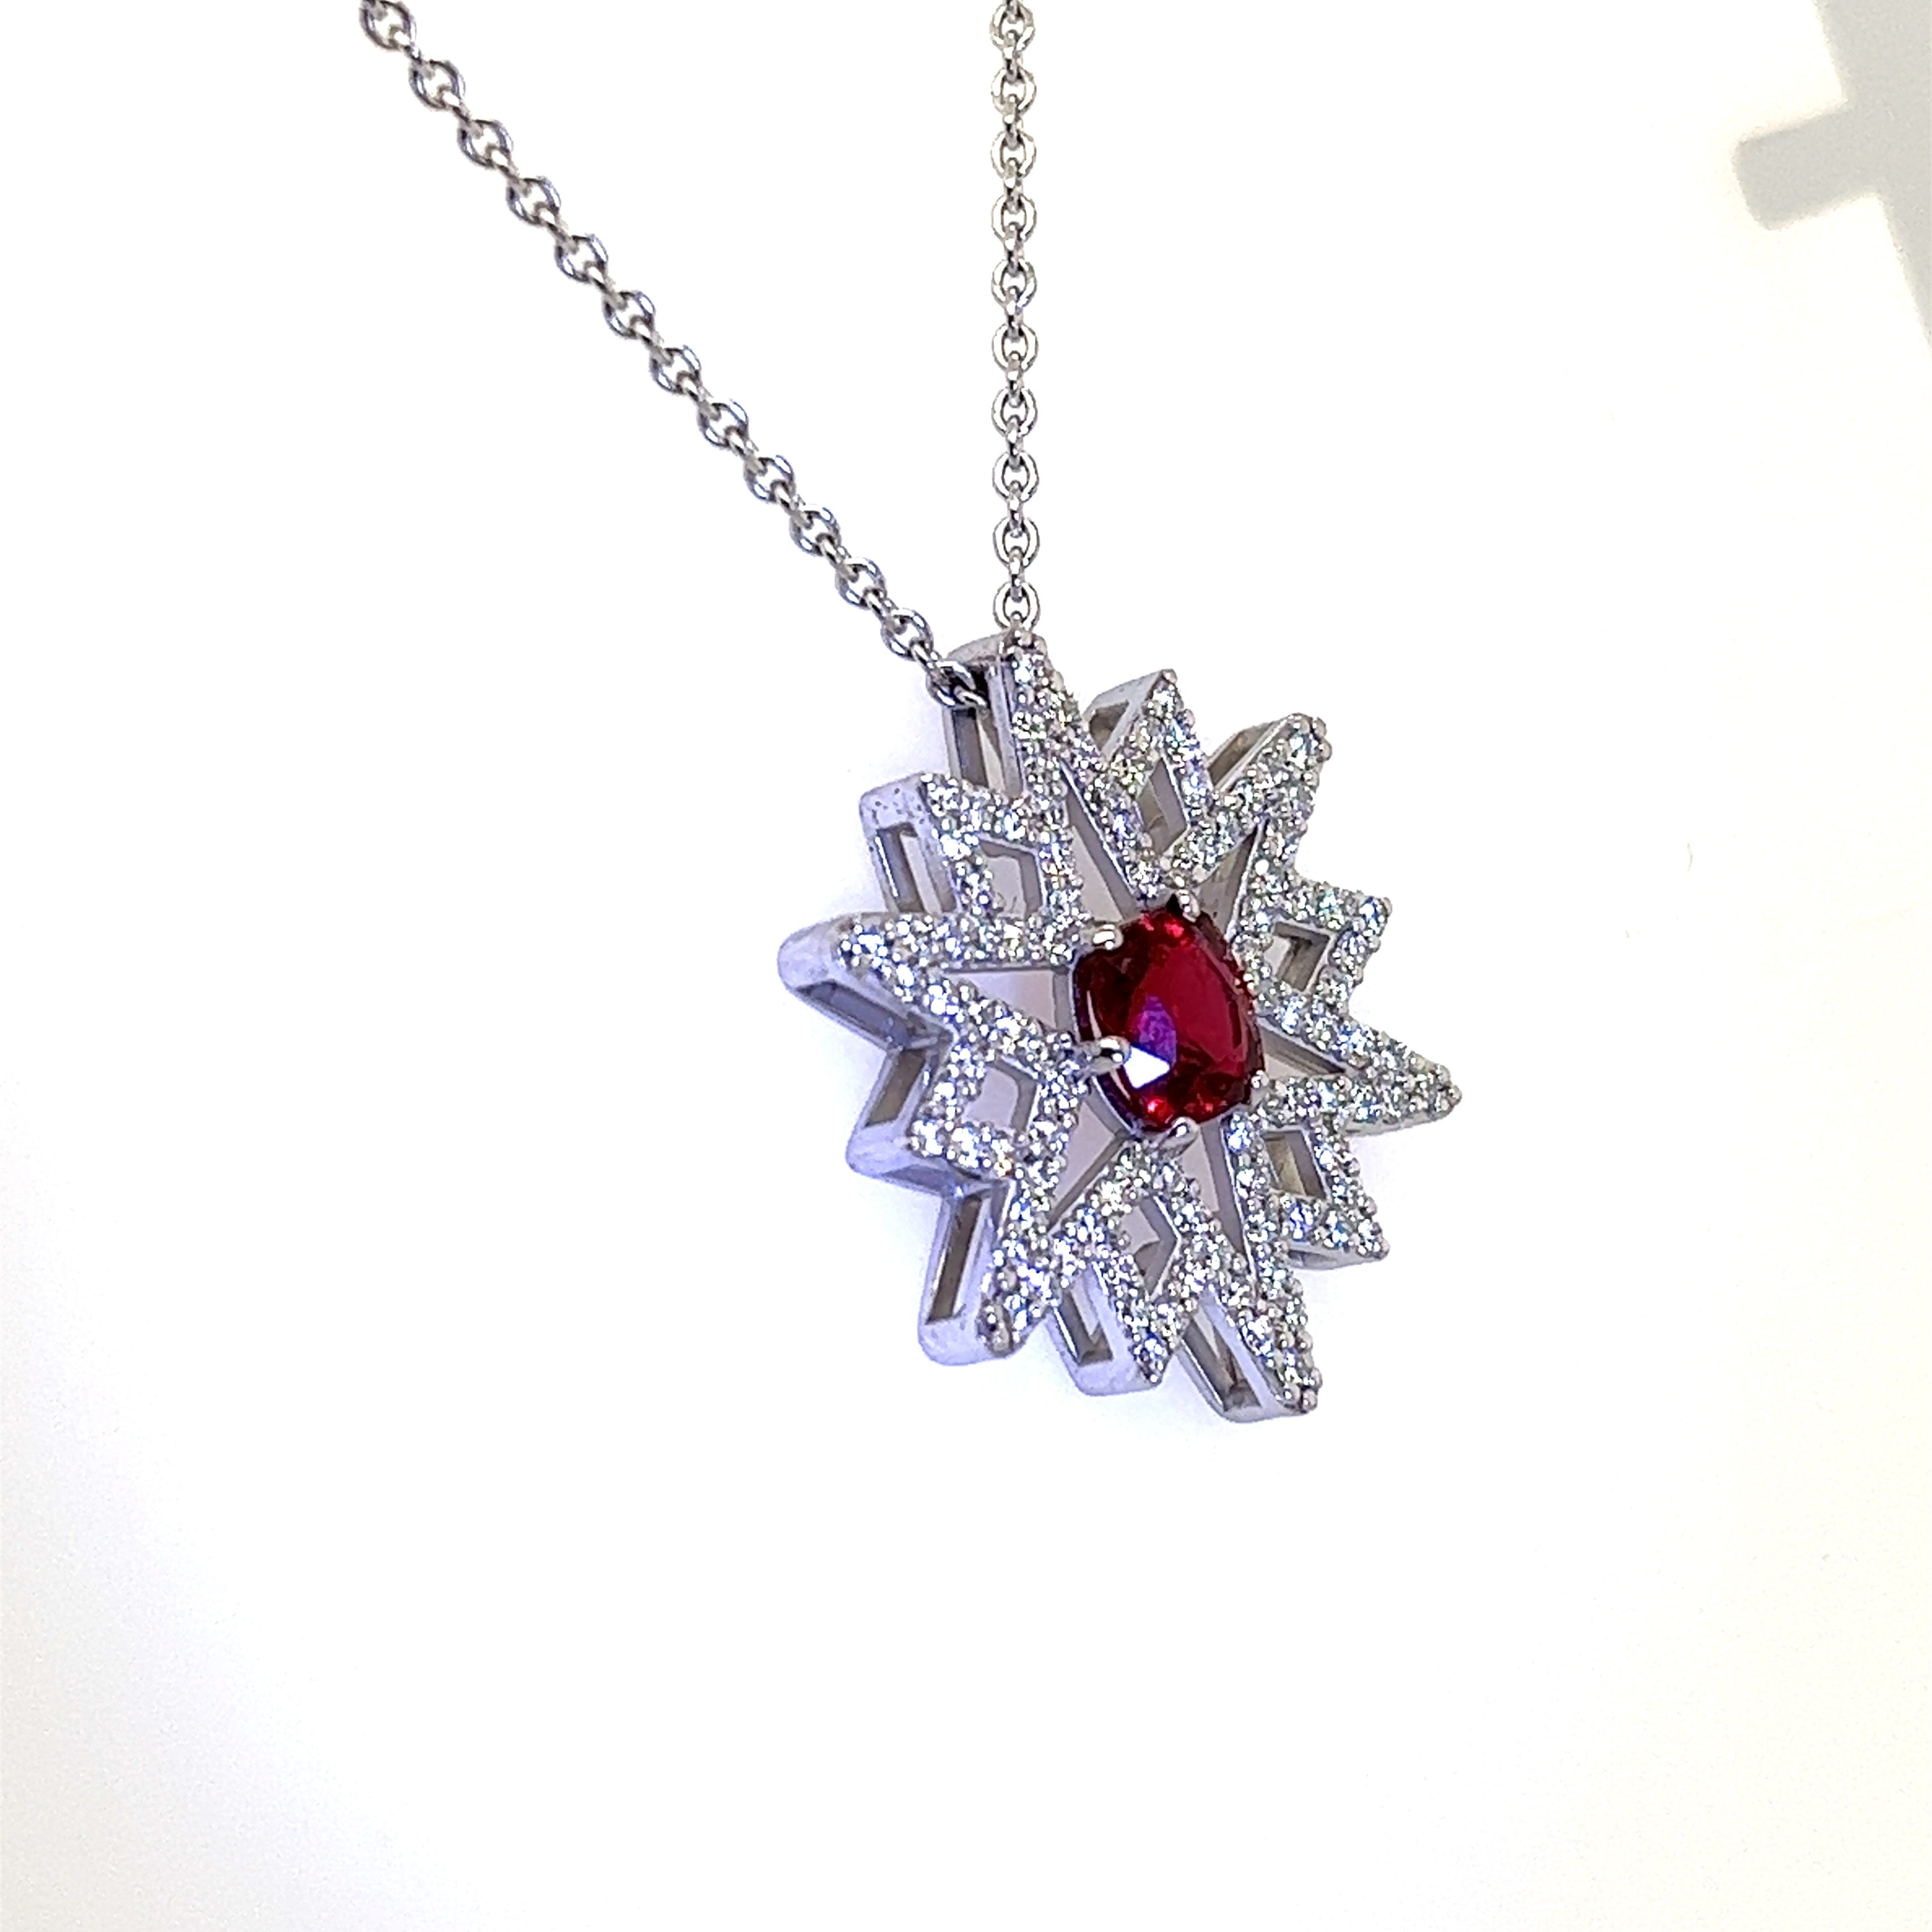 Red Spinel Necklace